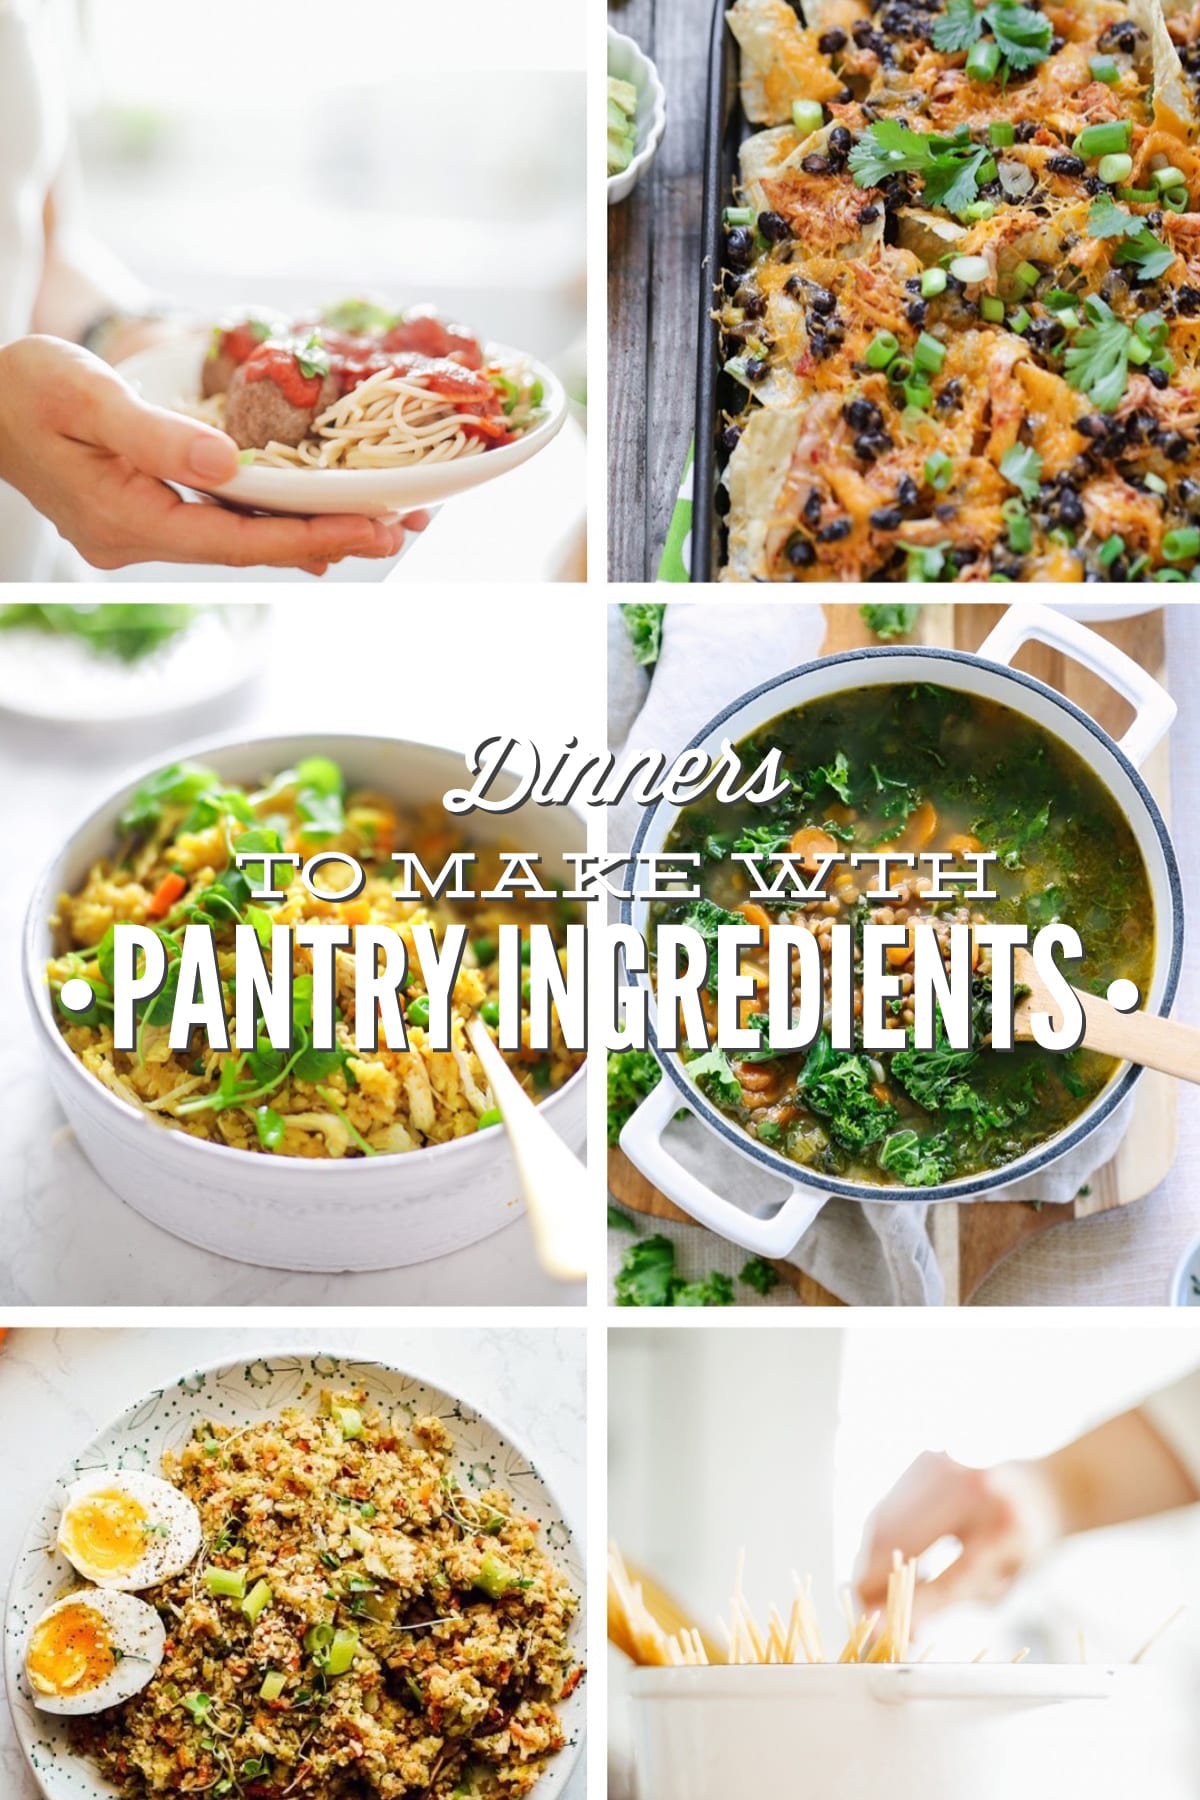 Pantry Dinner Ideas: What to Stock and Make From Your Pantry